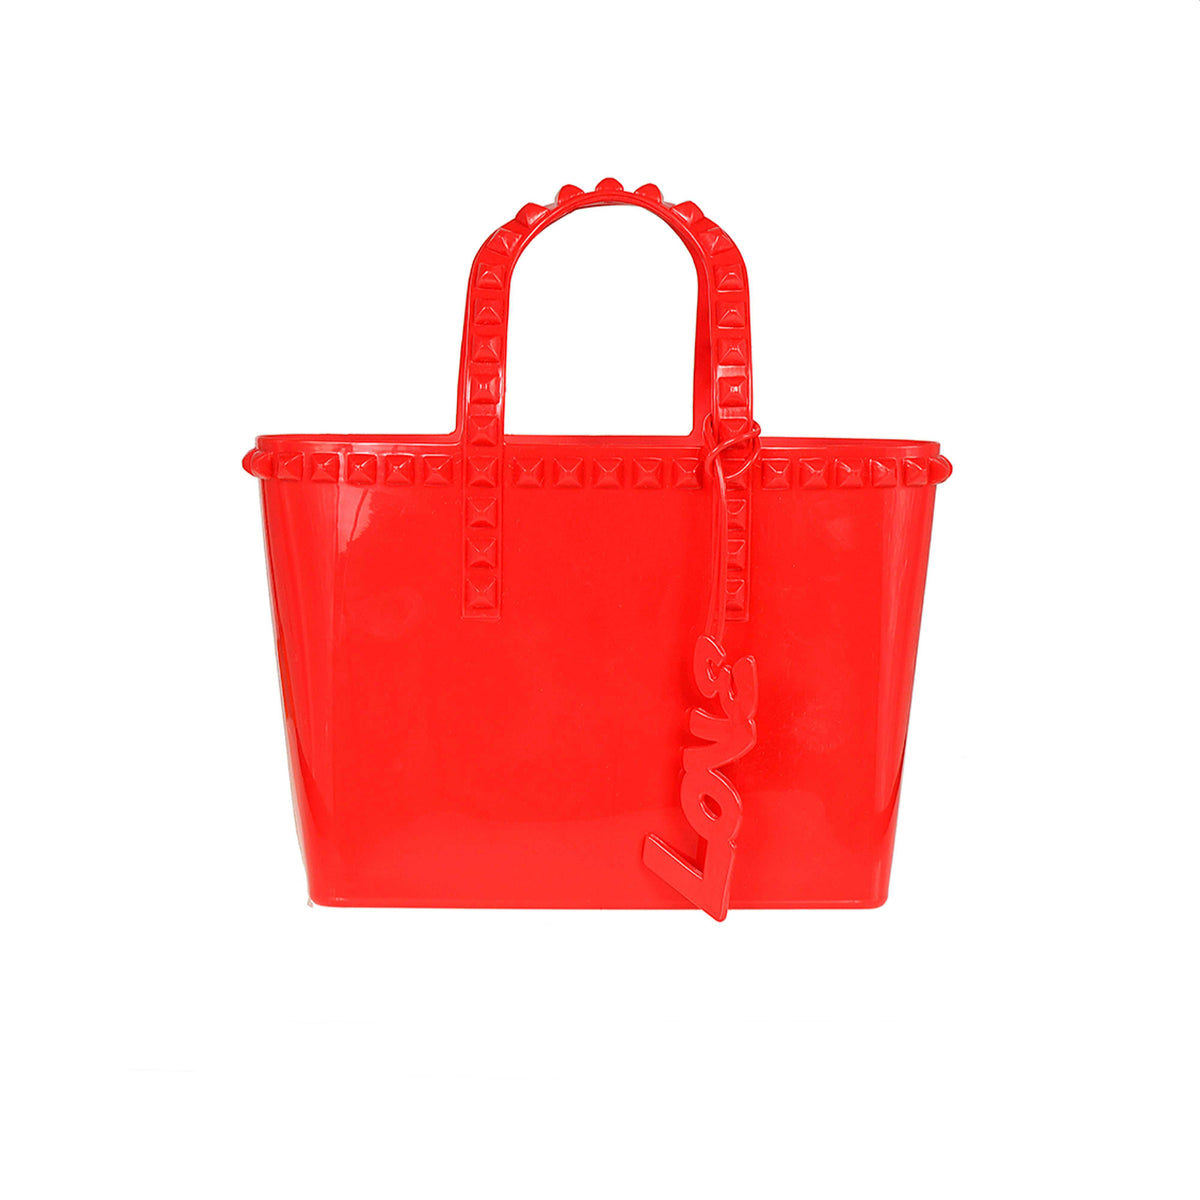 Micro mini red jelly tote perfect to go with the Melissa shoes